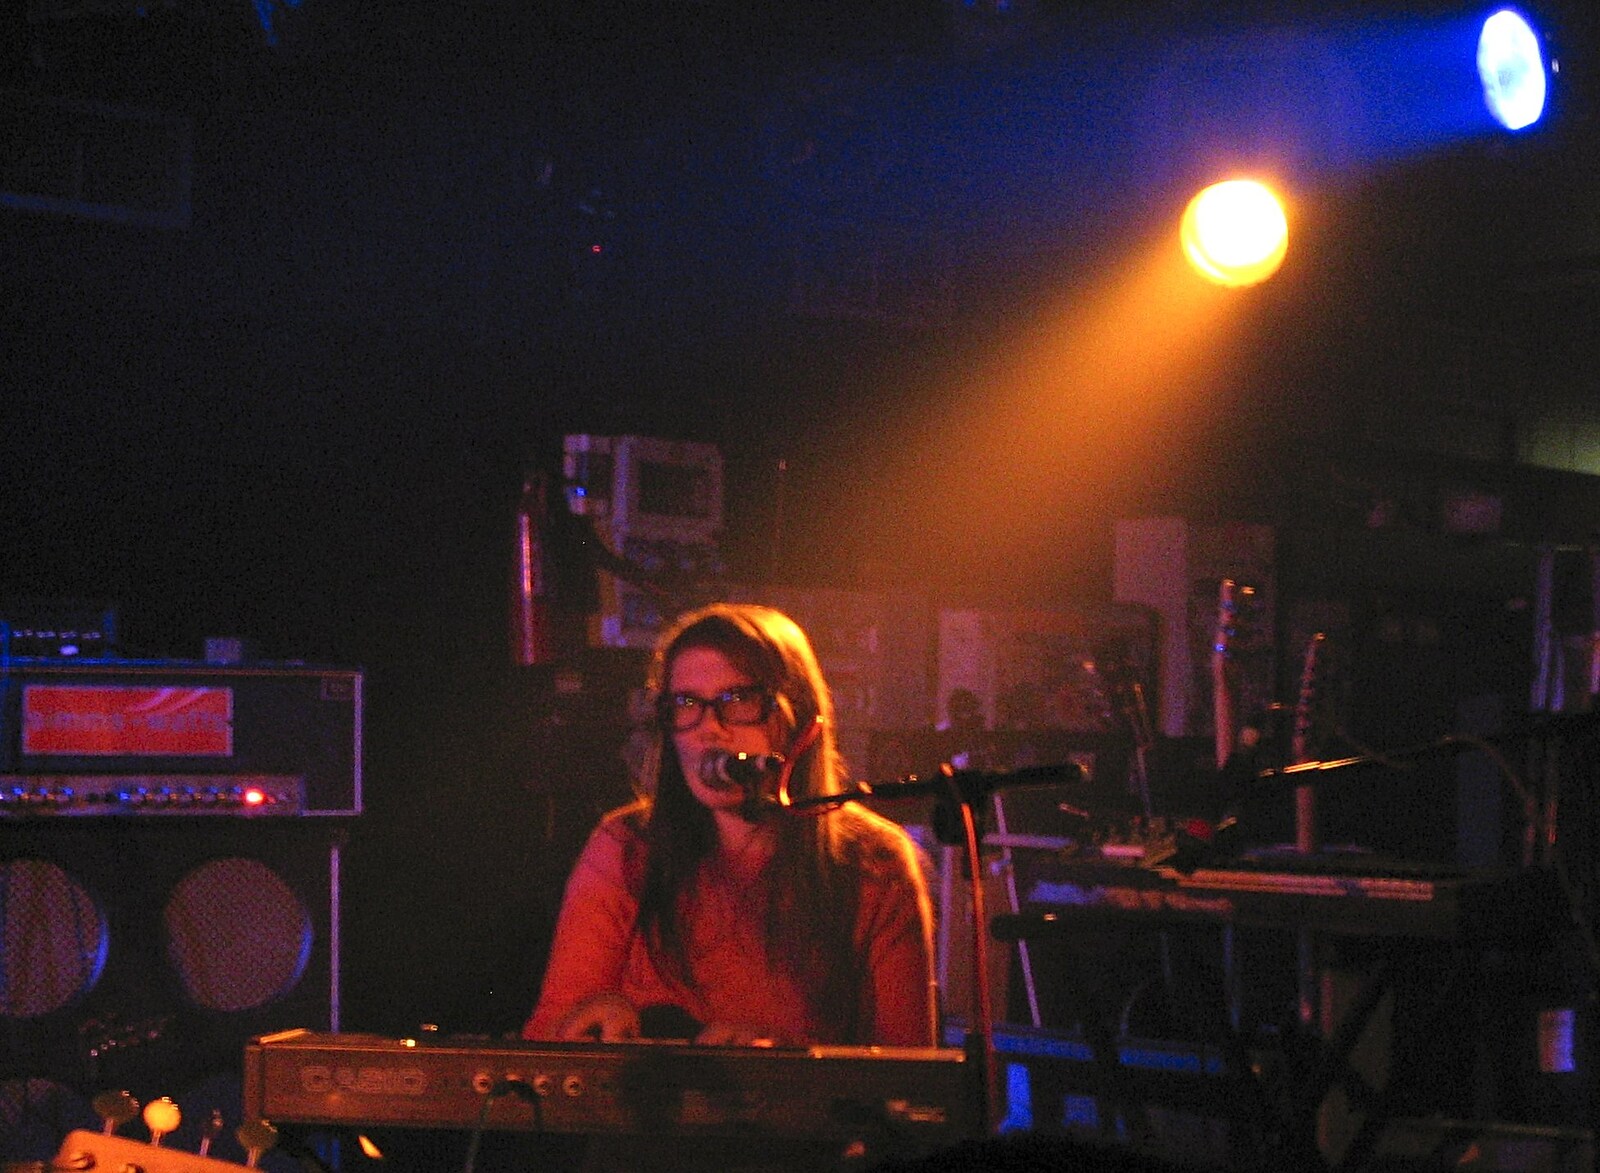 Embrace and Ed Harcourt Live in Norwich, Norfolk - 17th November 2004: Other-wordly keyboard style